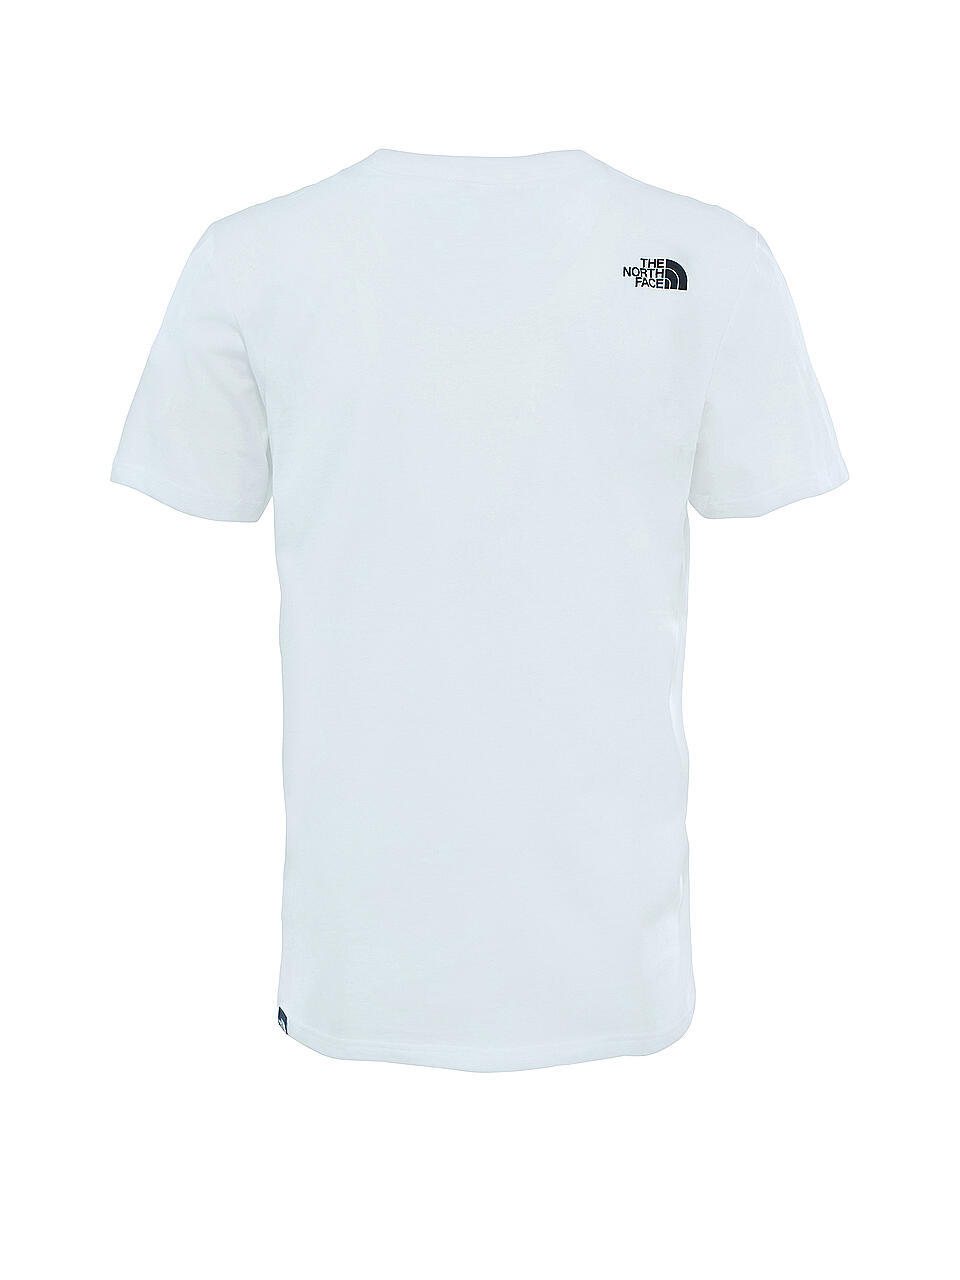 THE NORTH FACE | T-Shirt  | weiß